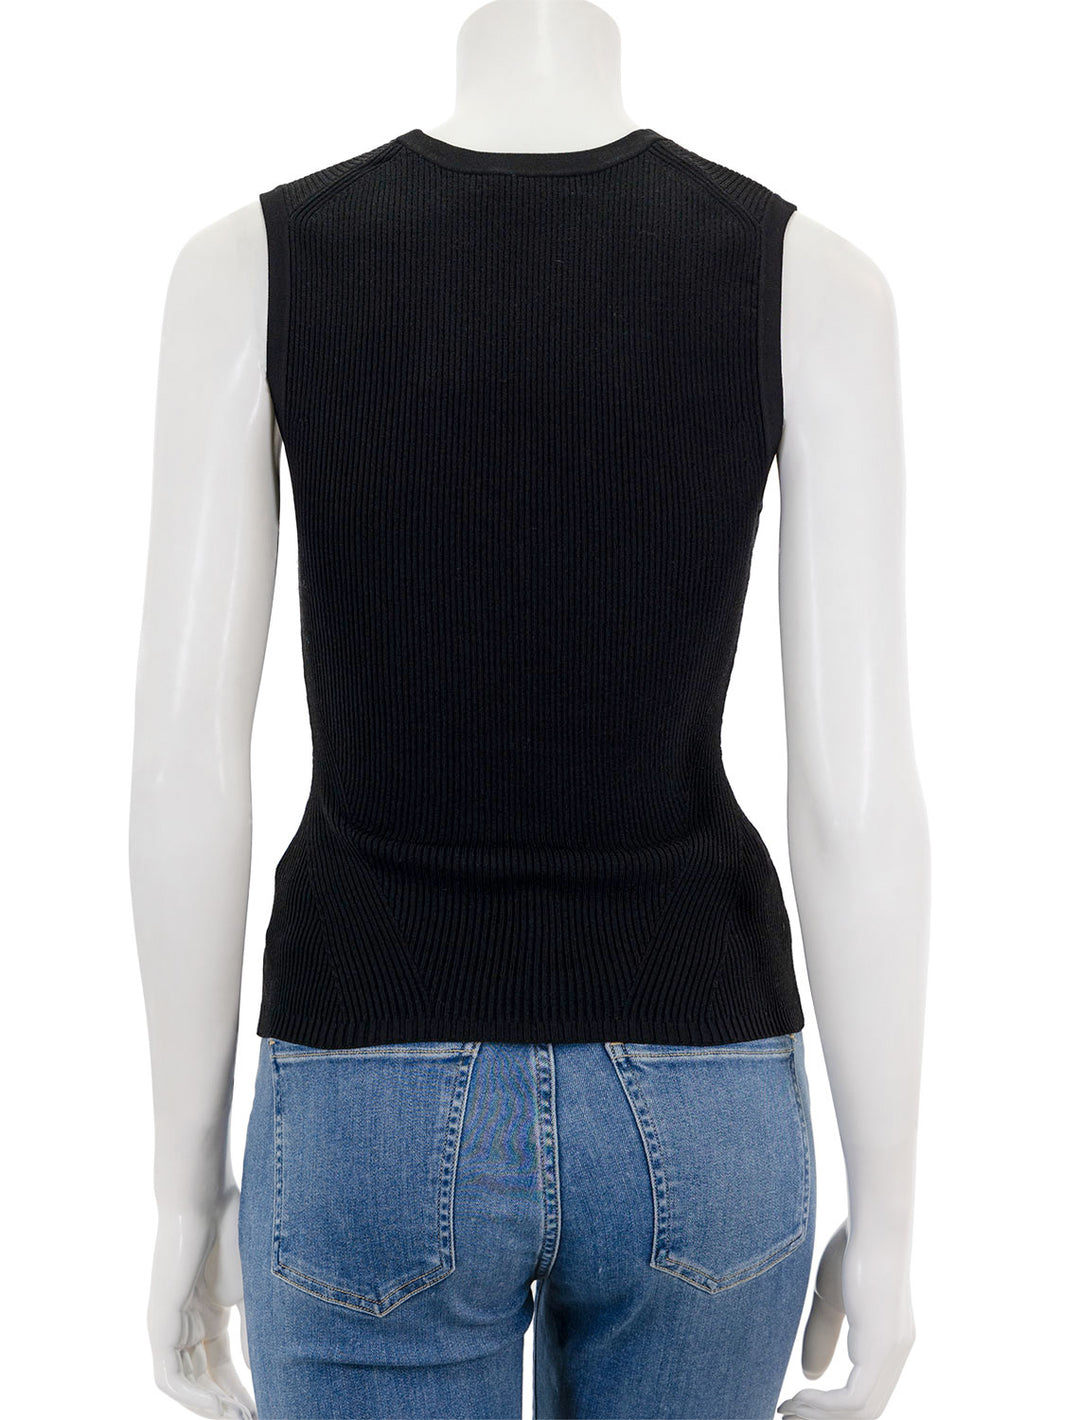 Back view of Veronica Beard's sid sleeveless pullover in black.